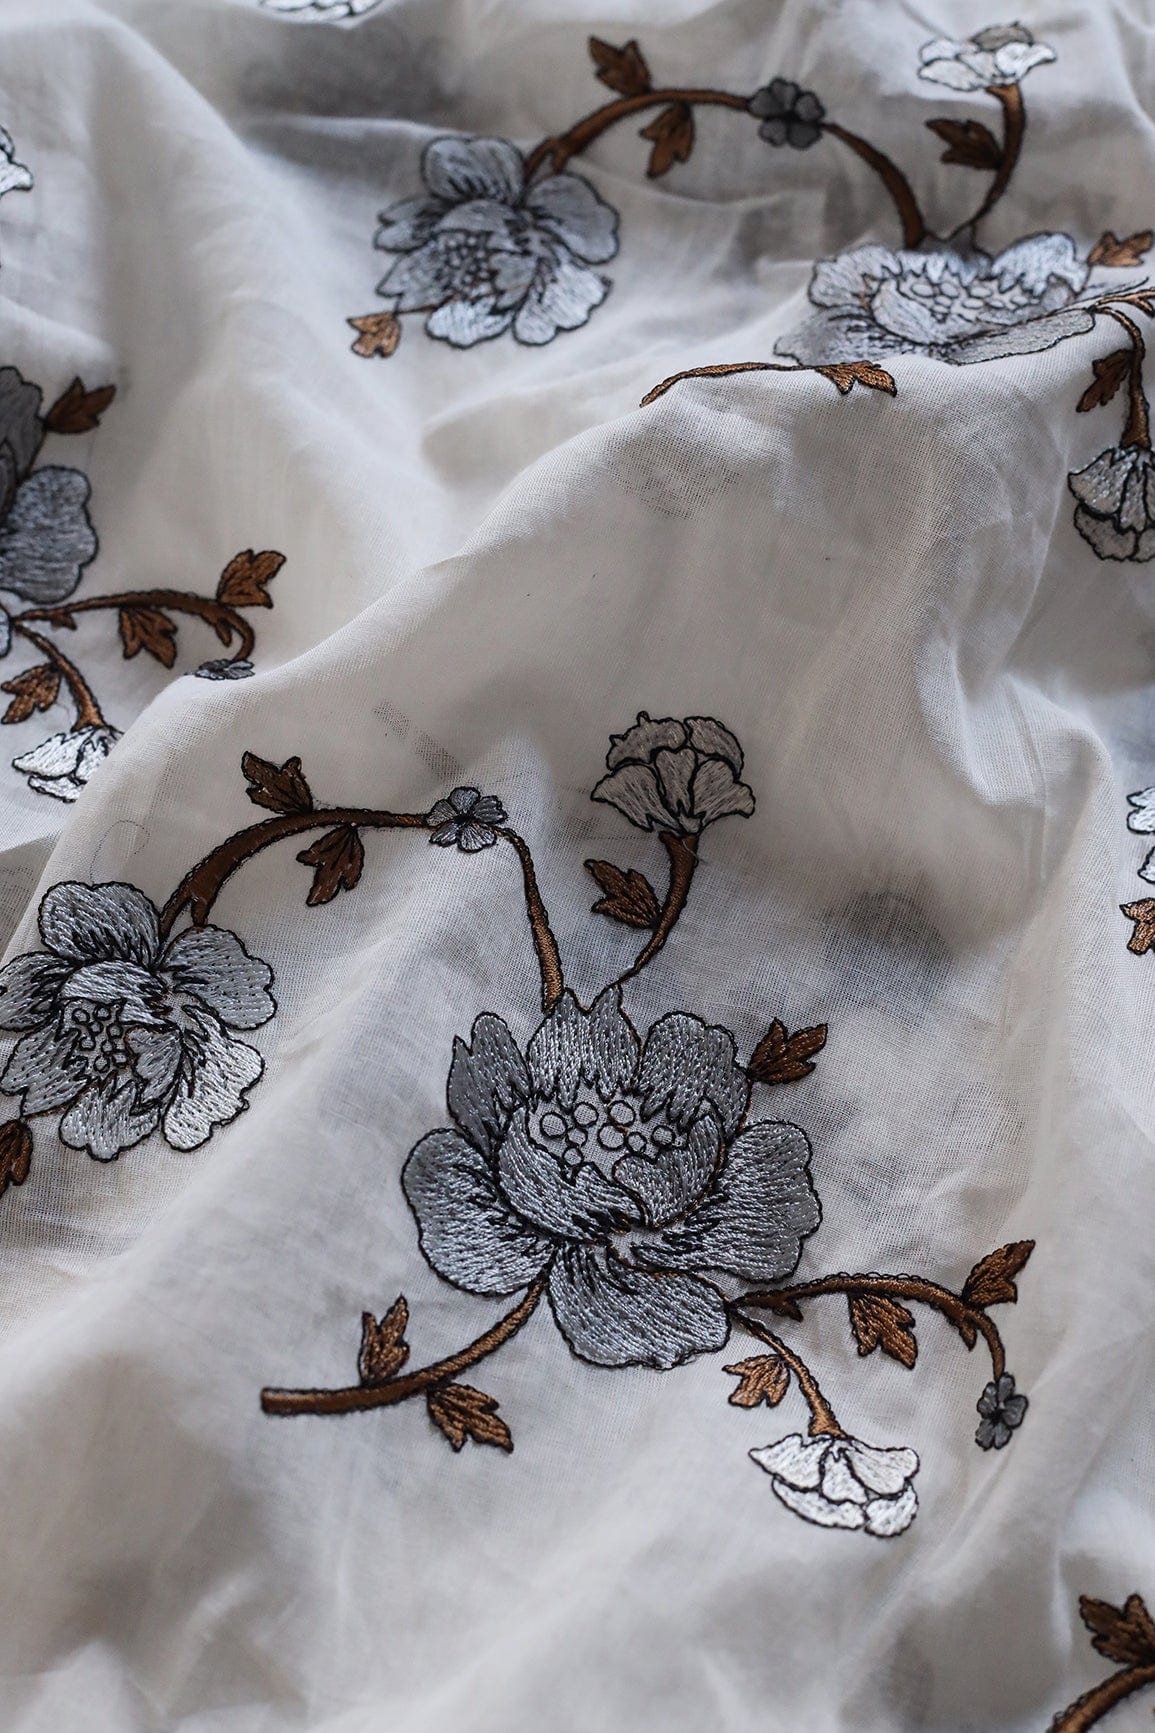 doeraa Embroidery Fabrics Grey And Brown Thread Beautiful Floral Embroidery Work On White Organic Cotton Fabric